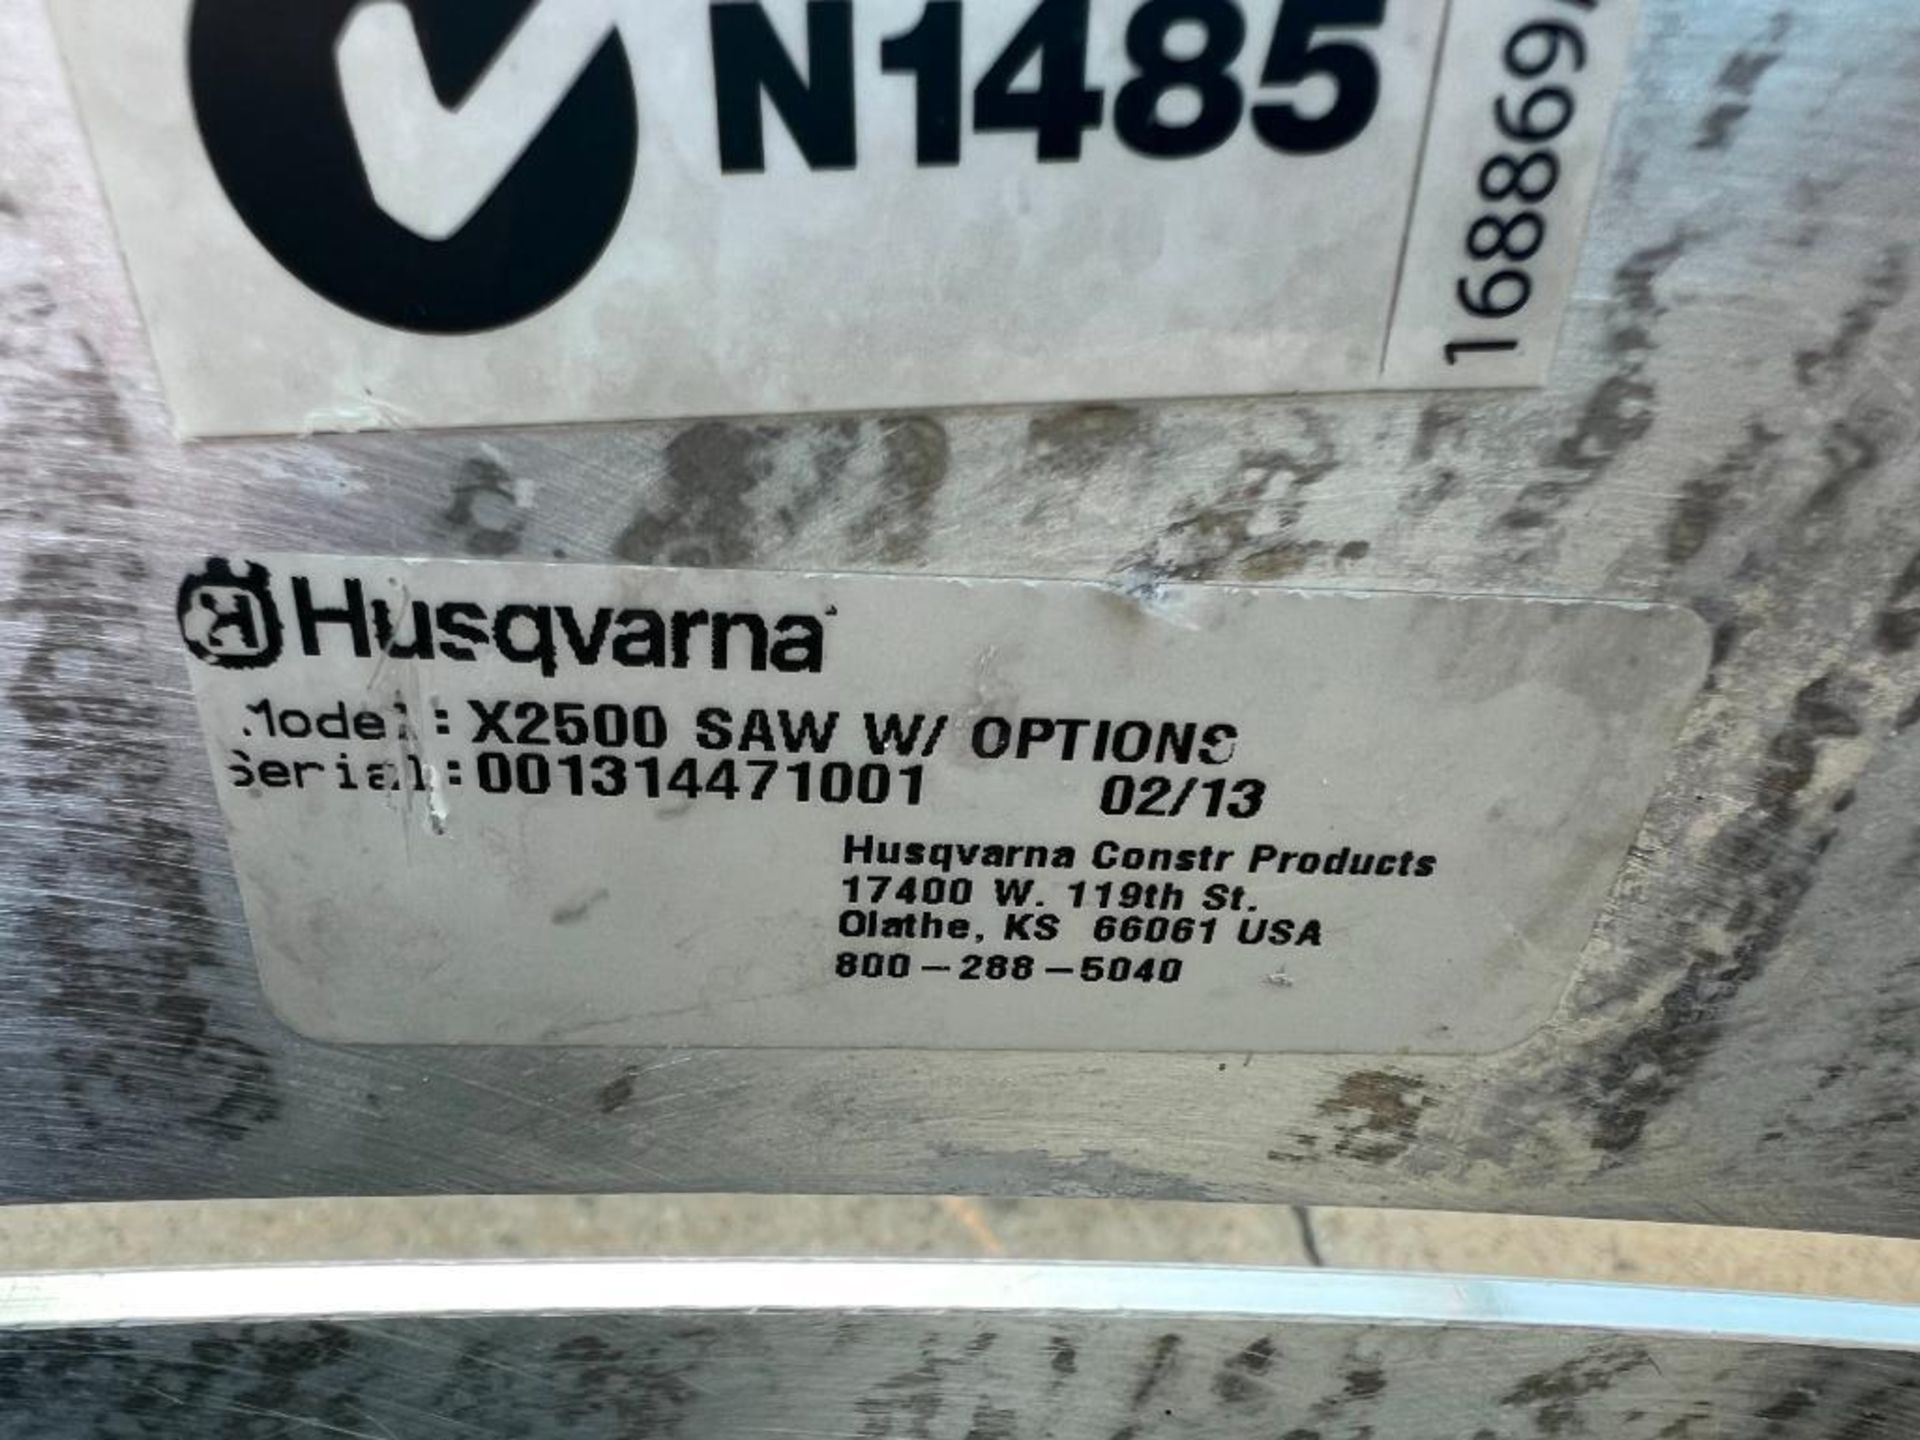 2013 Husqvarna X2500 Soff-Cut Concrete Saw w/Options, Hours Unknown, Serial #001314471001, (Bad) Hon - Image 5 of 7